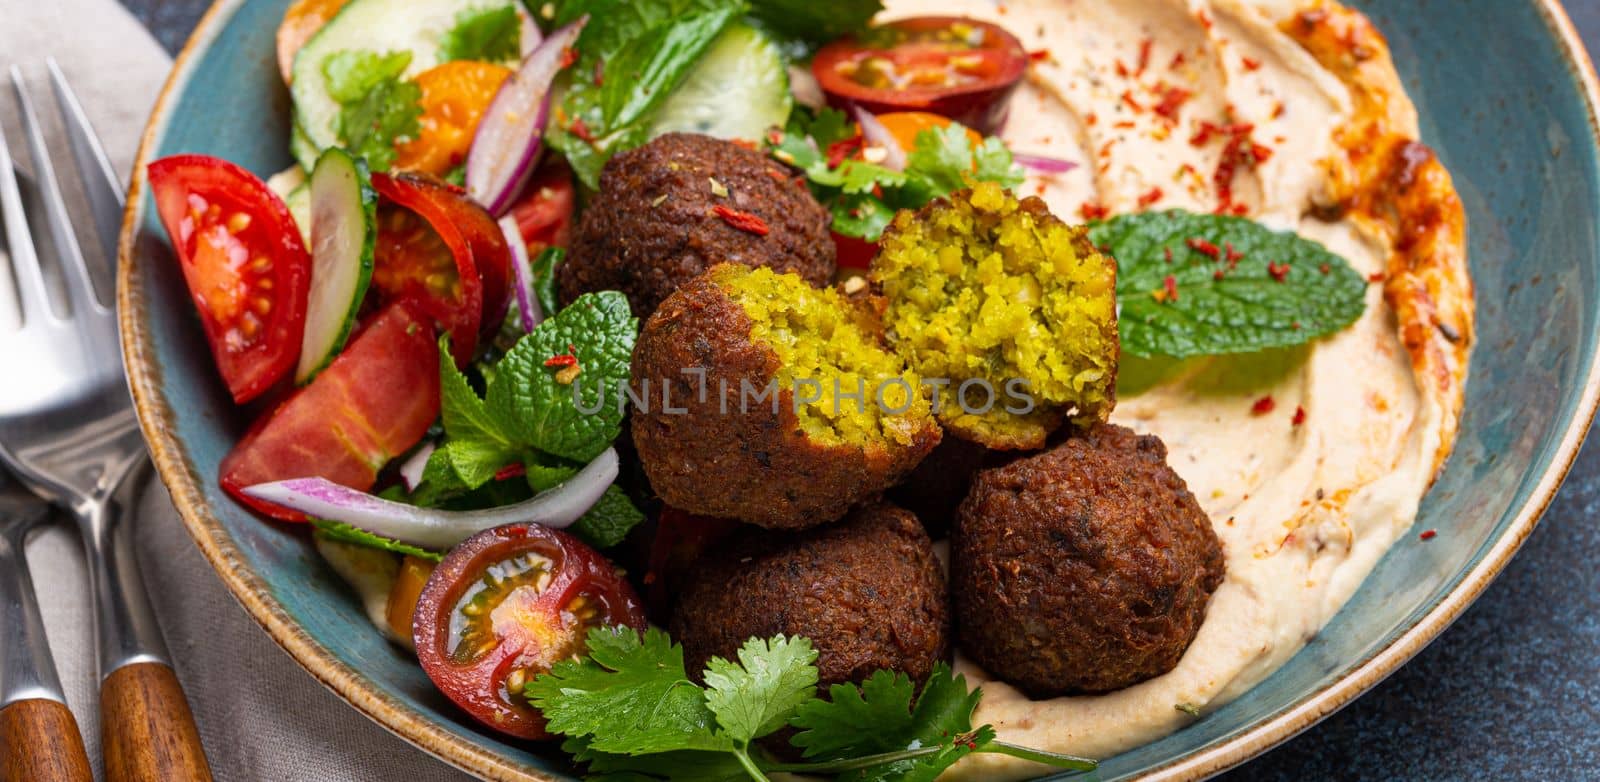 Close up of Middle Eastern Arab meal with fried falafel, hummus, vegetables salad by its_al_dente